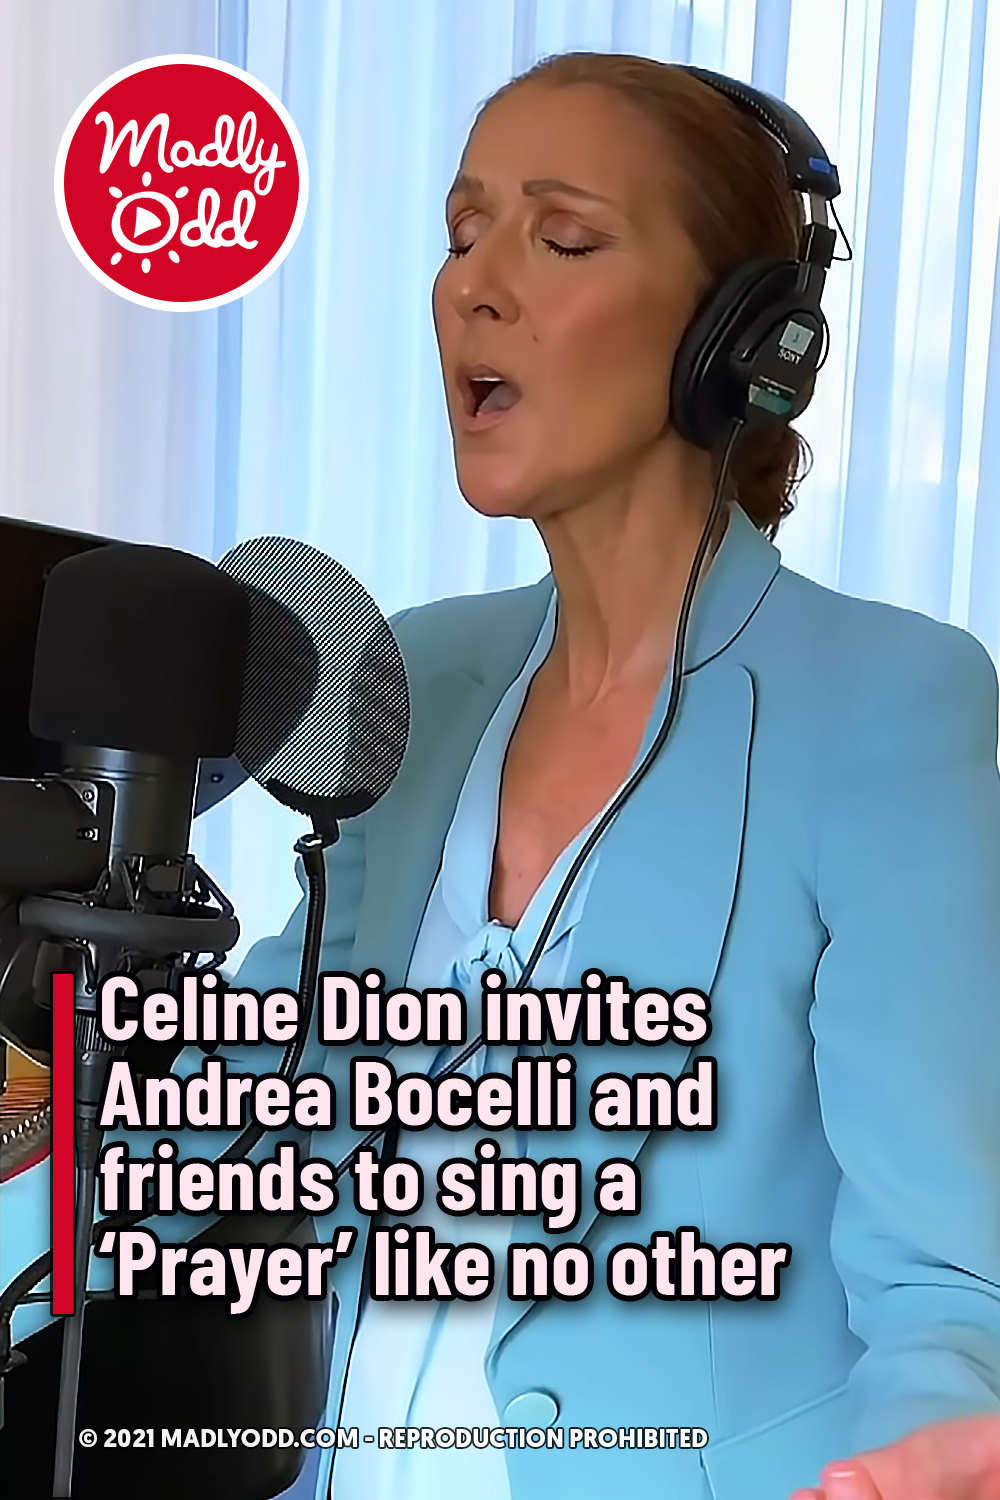 Celine Dion invites Andrea Bocelli and friends to sing a ‘Prayer’ like no other